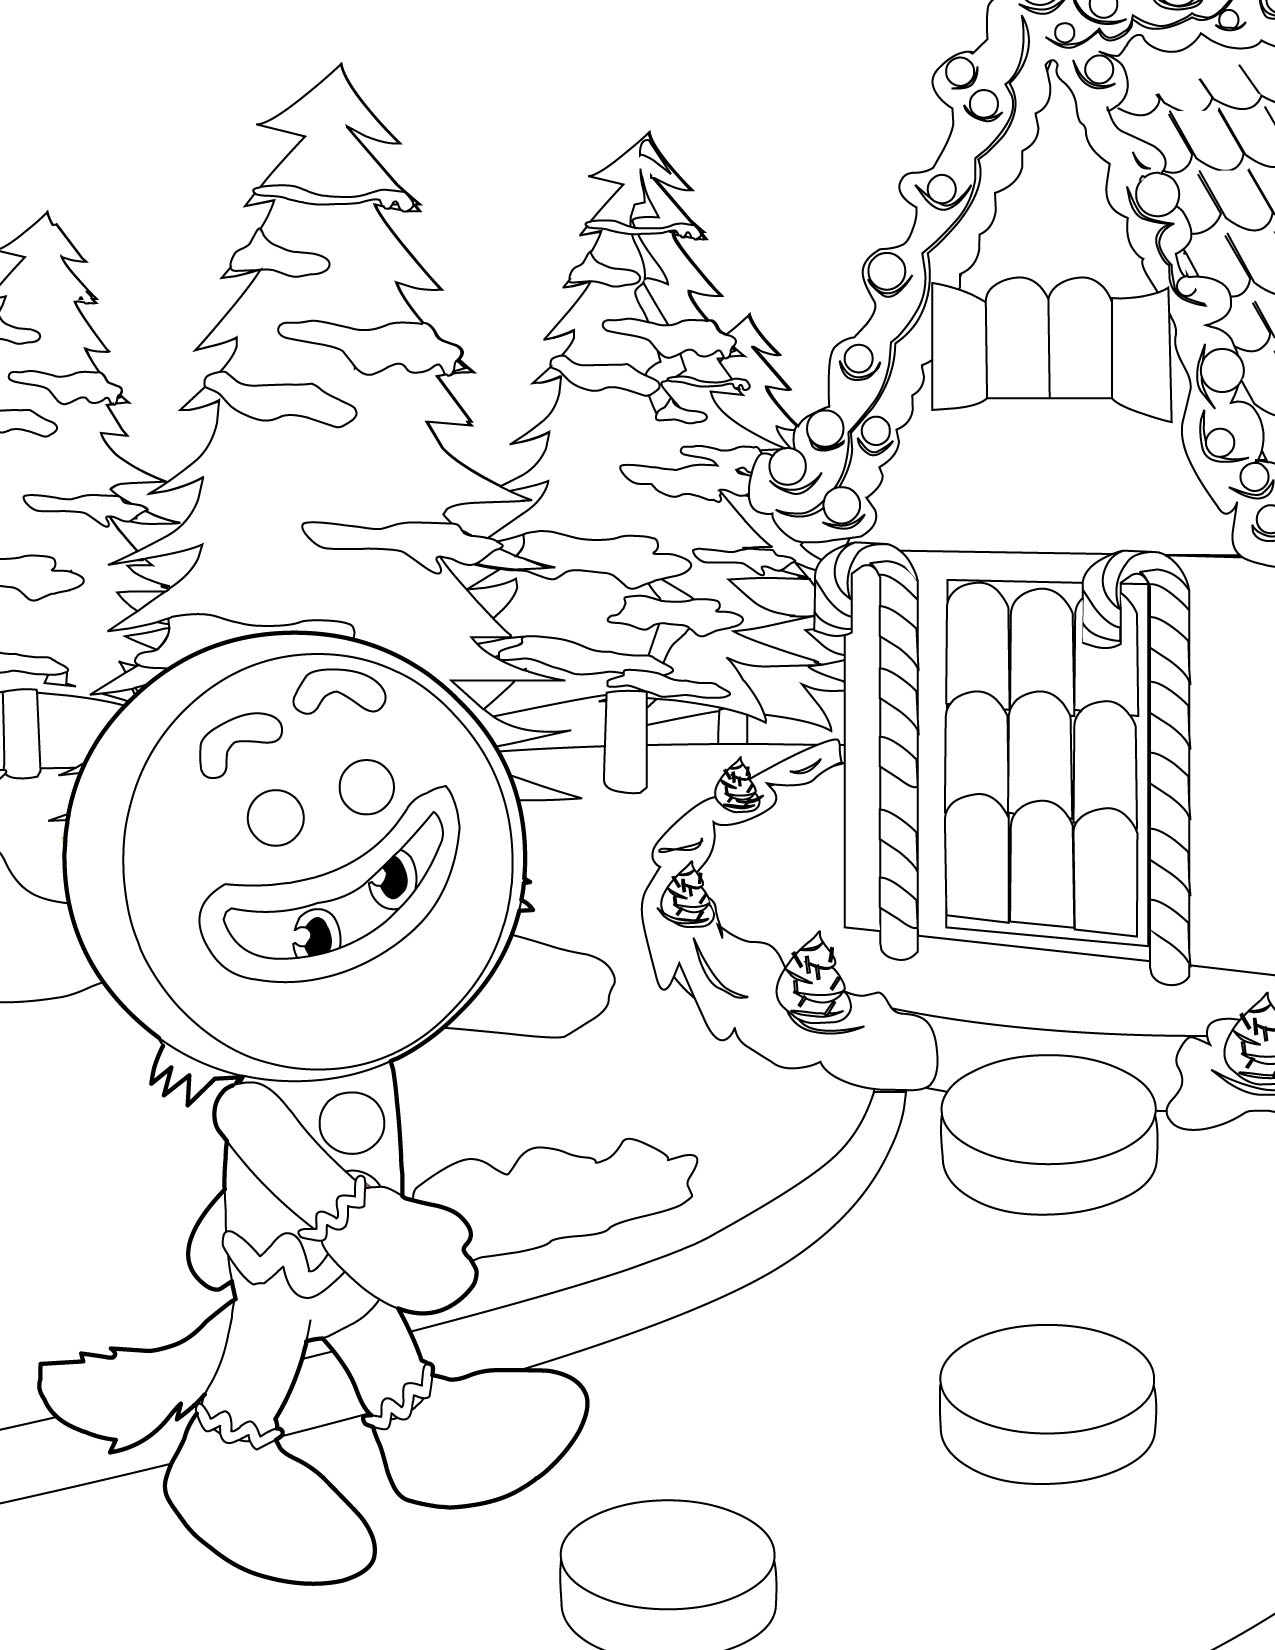 Download Free Printable Gingerbread House Coloring Pages for Kids